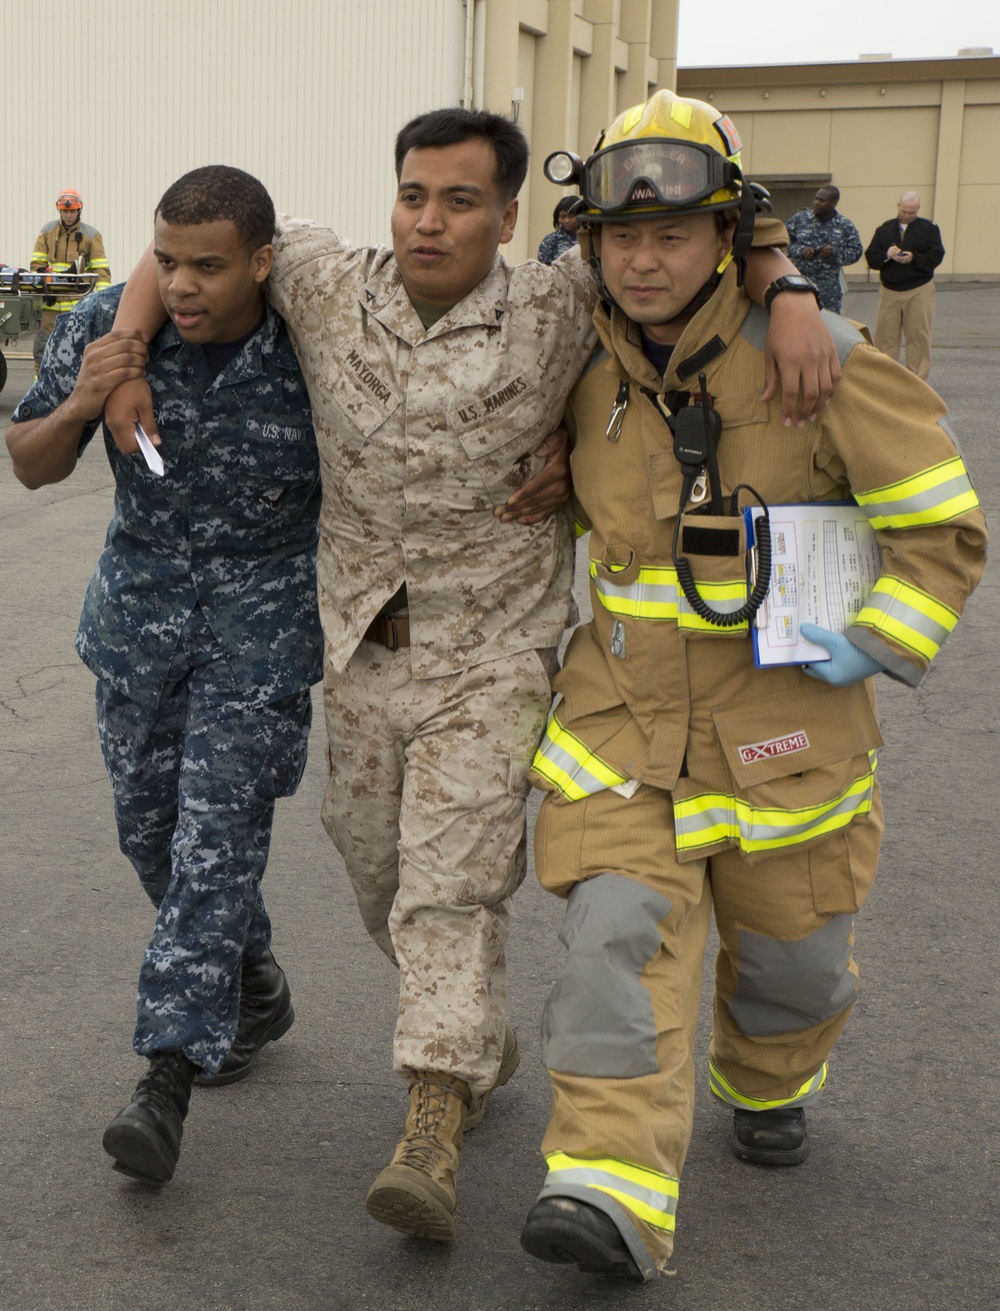 DVIDS - Images - Mass casualty evacuation drill unites first